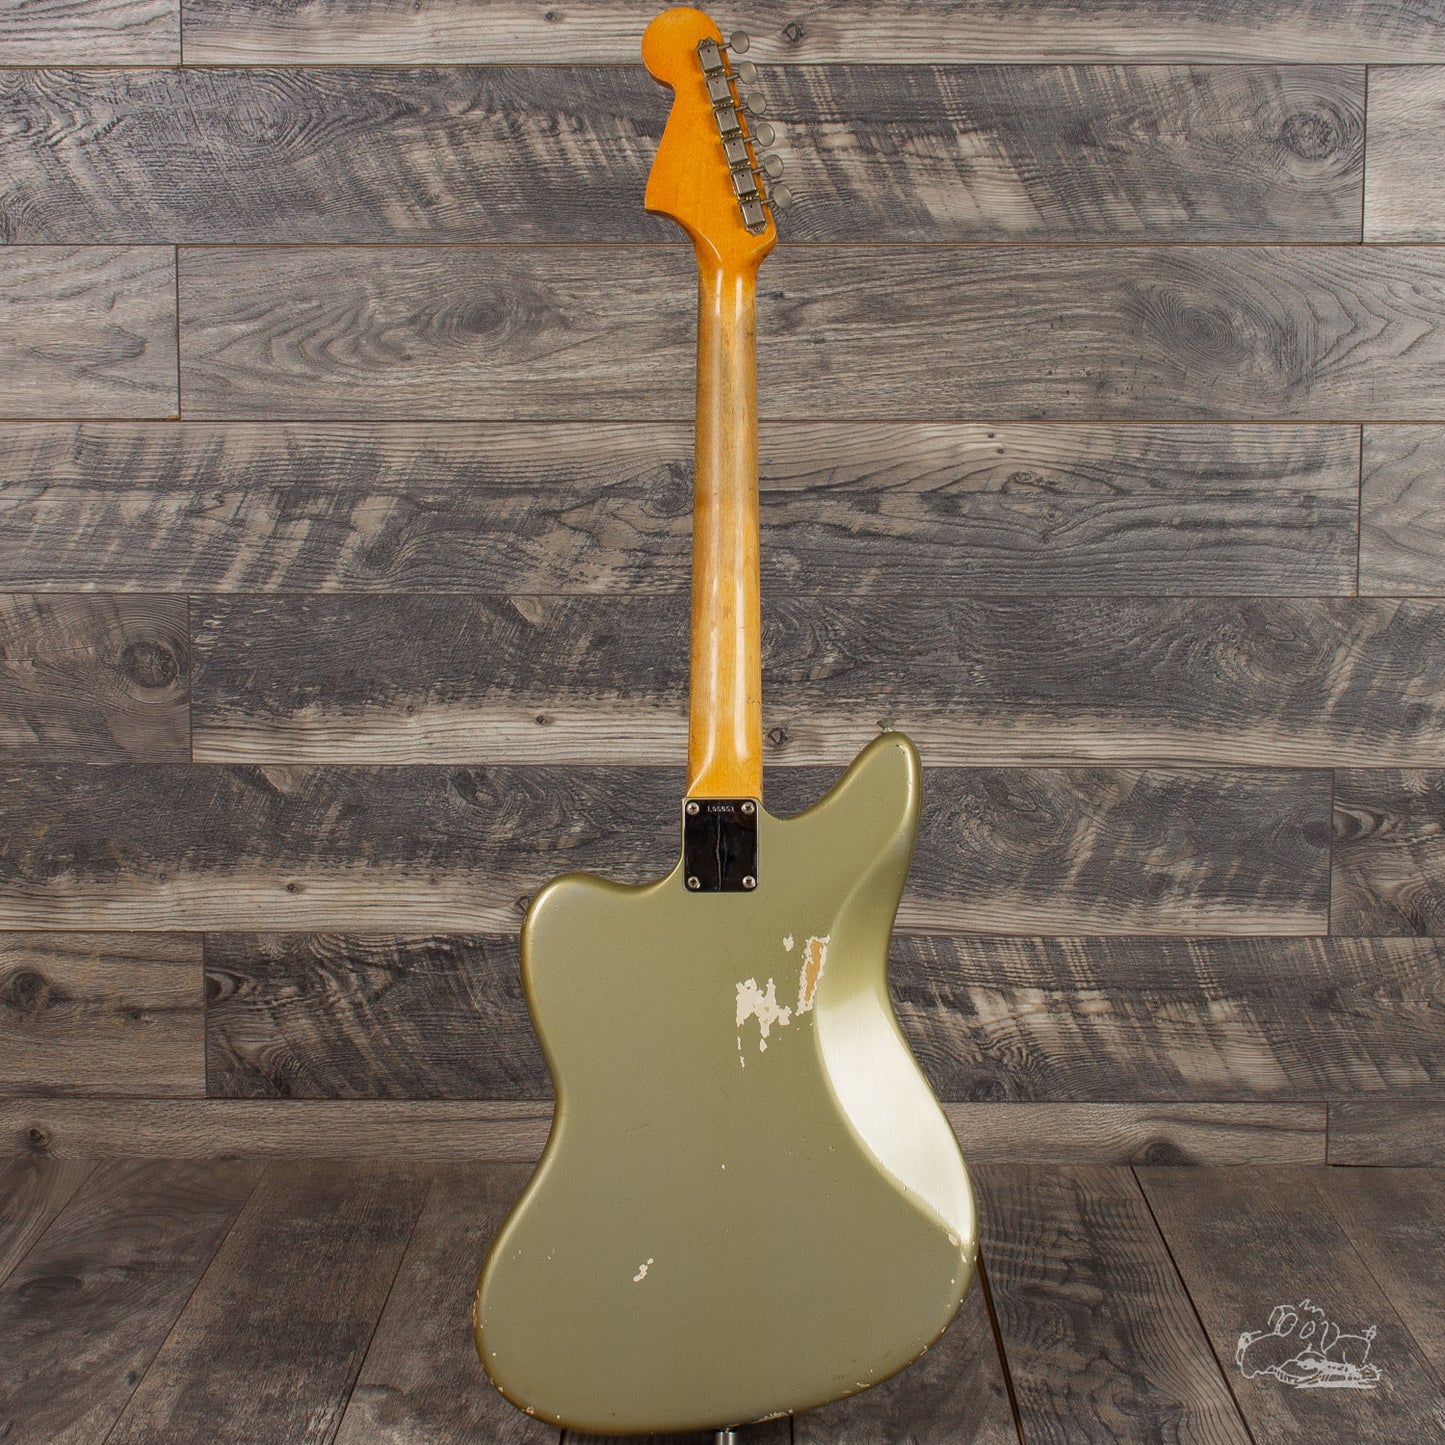 1965 Fender Jaguar in Inca Silver with matching headstock